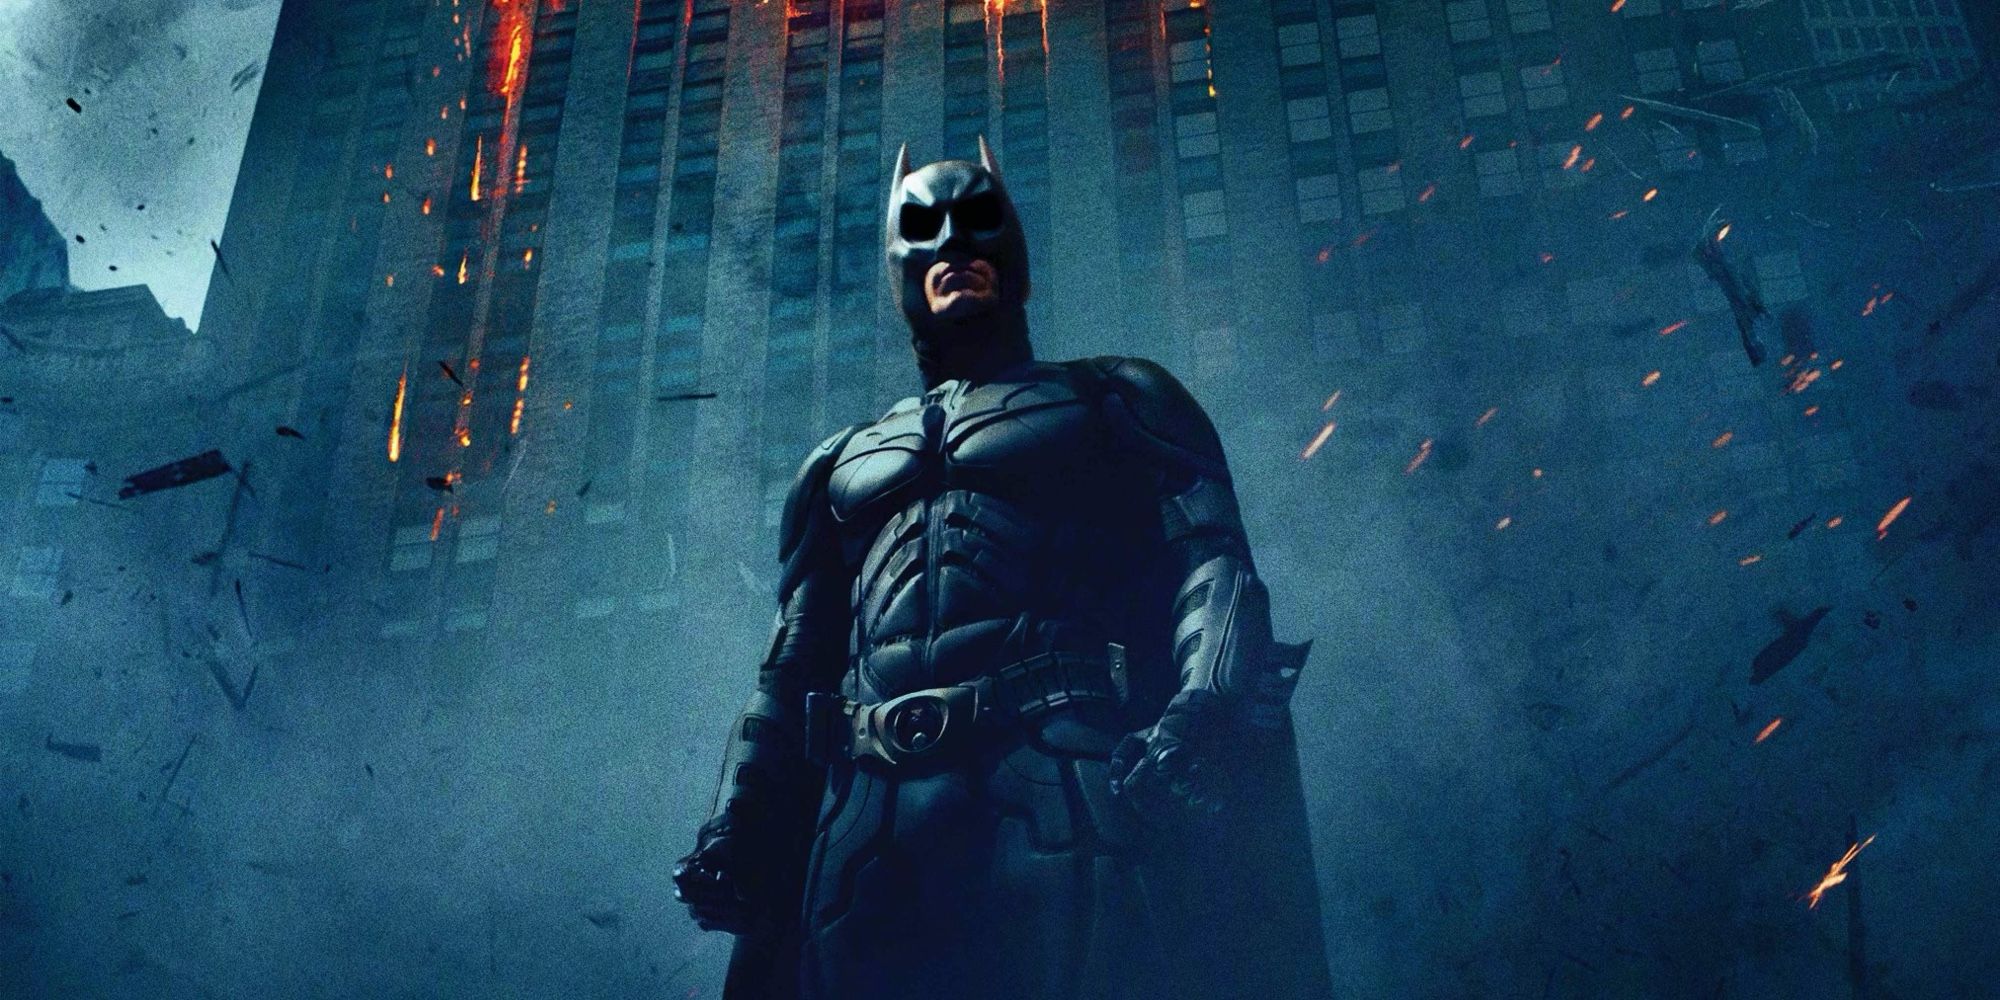 Batman stands in front of a dark building in The Dark Knight 